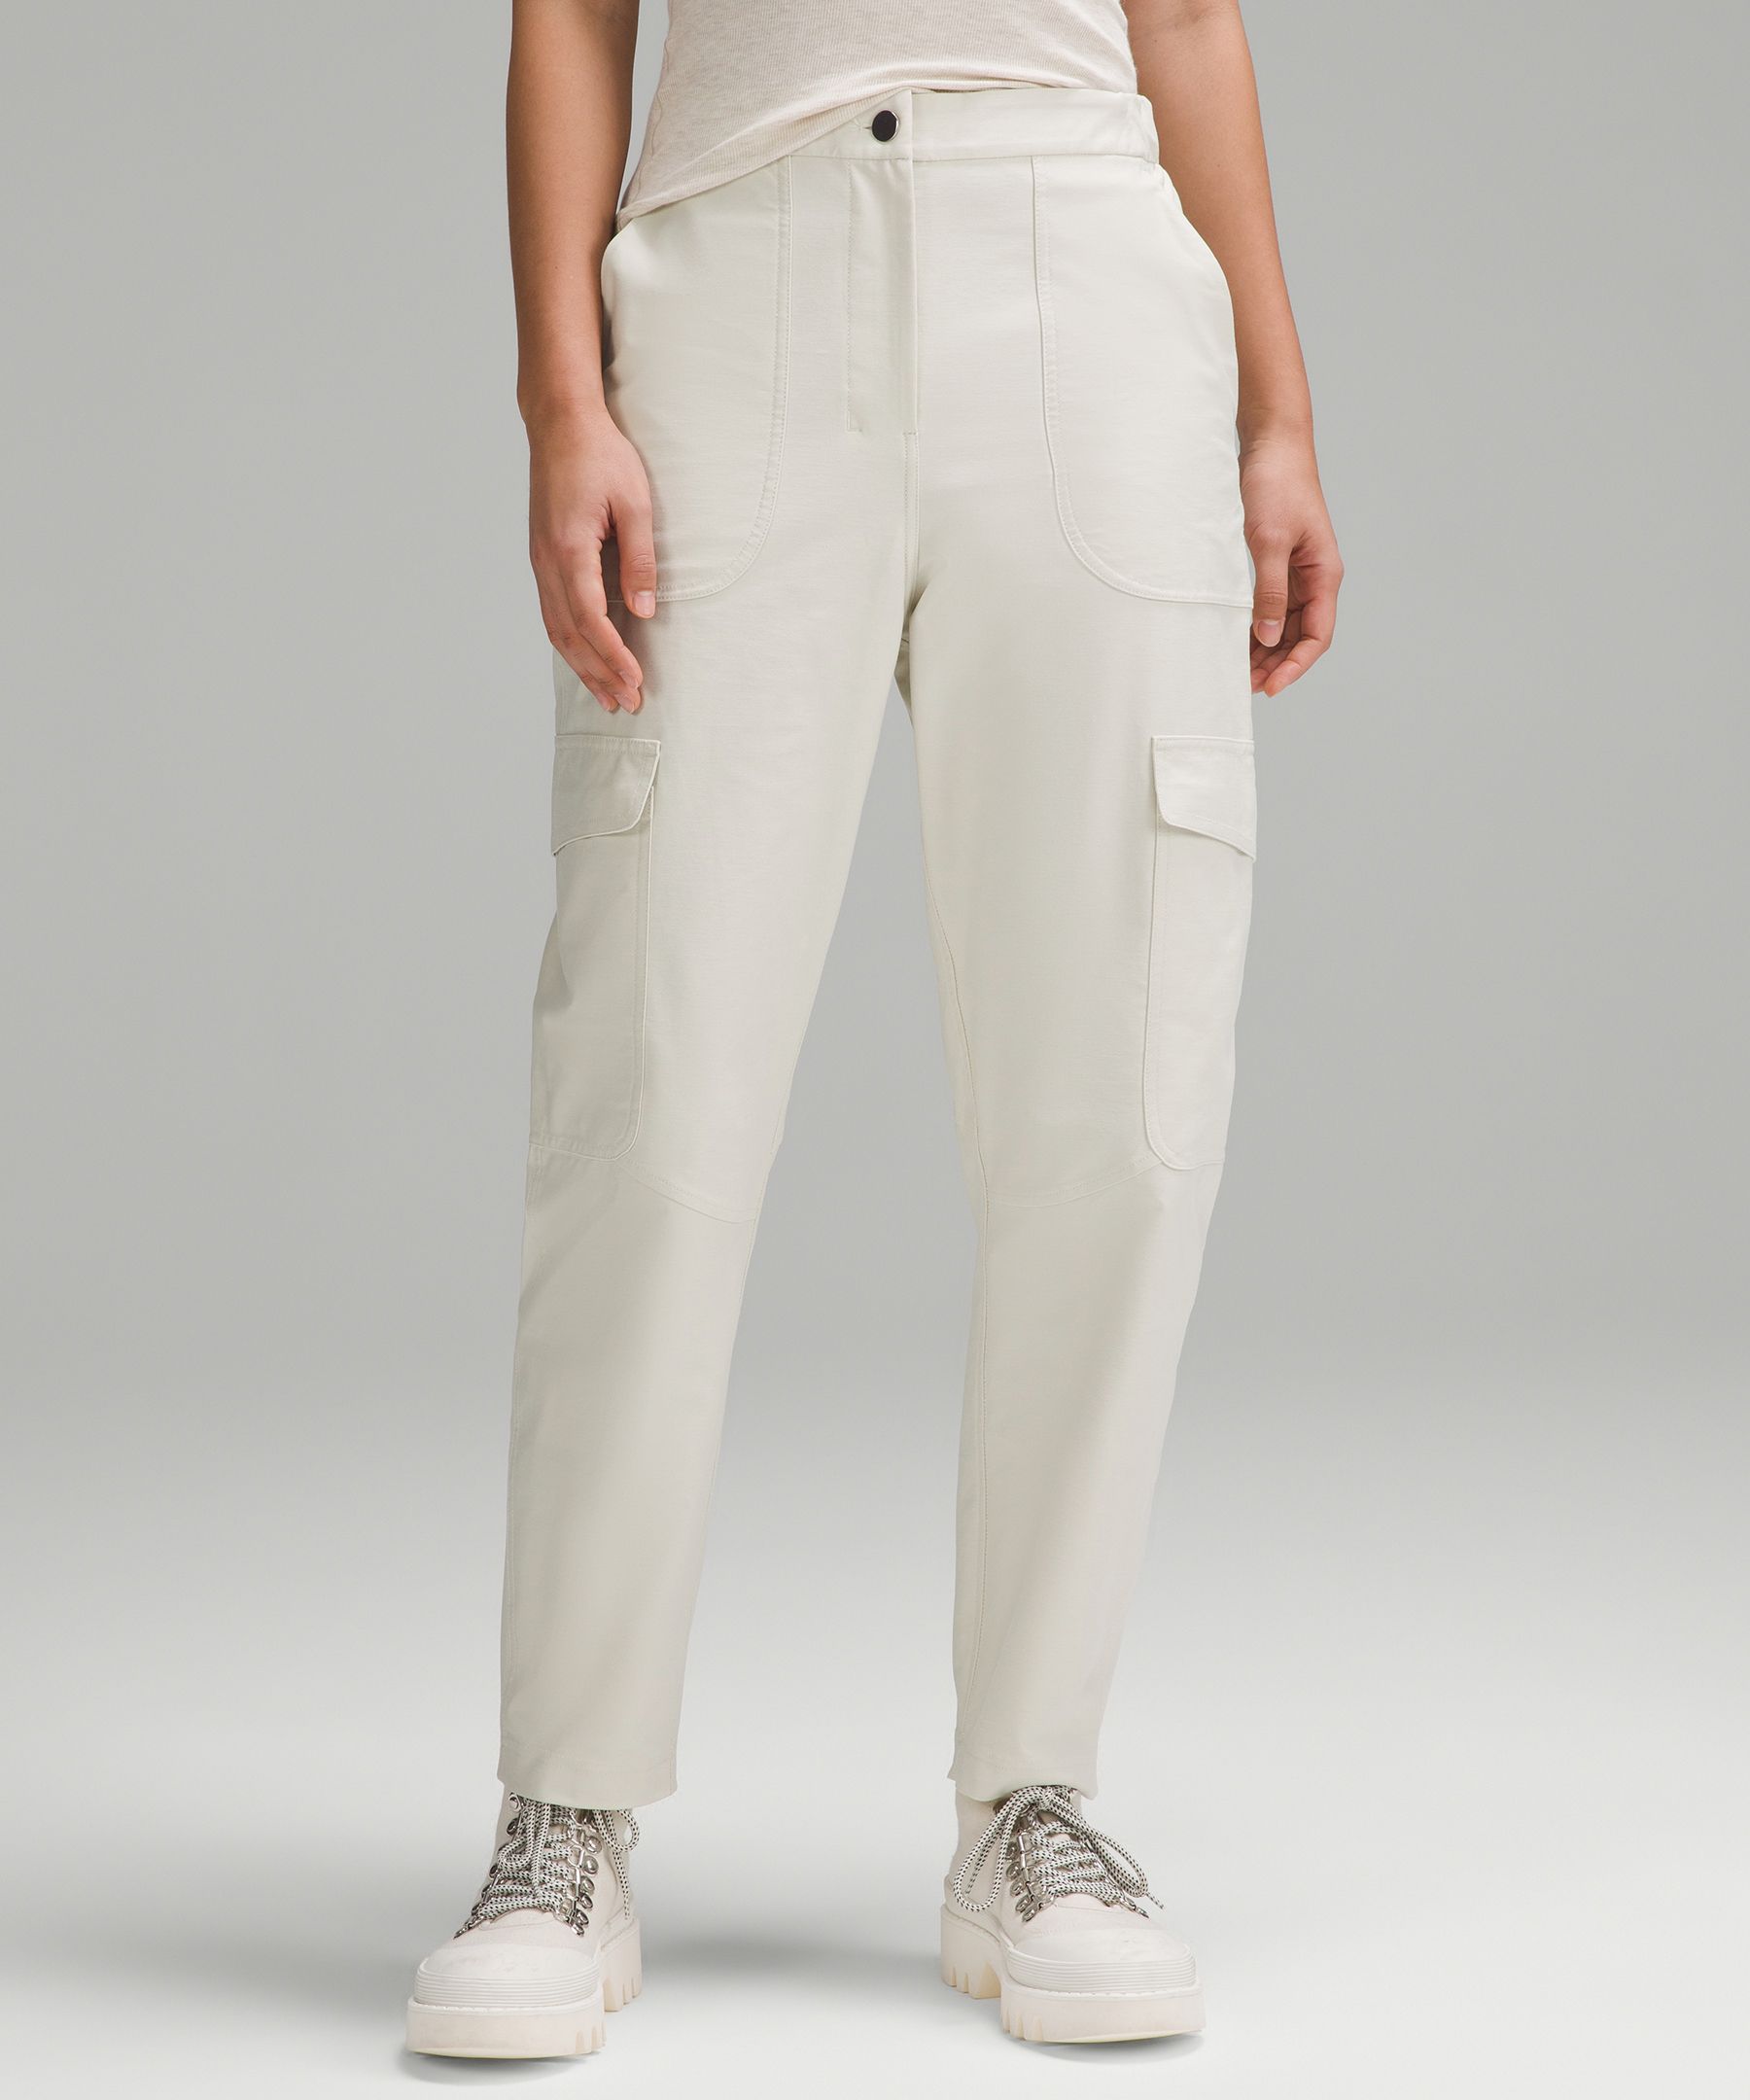 Women's Stretch Woven Tapered Cargo Pants - All in Motion Light